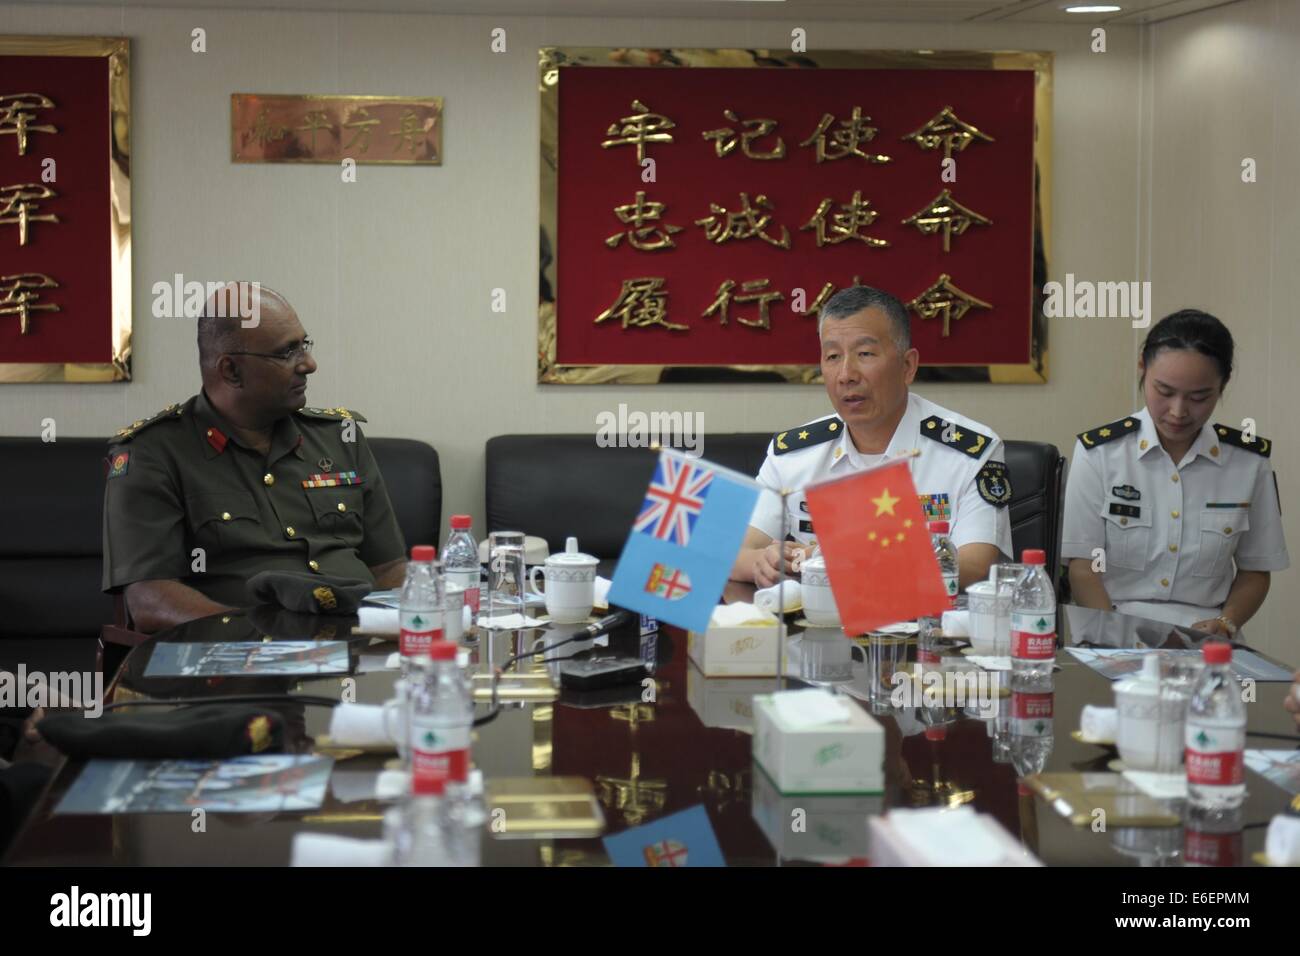 Suva, Fiji. 22nd Aug, 2014. Shen Hao (C), deputy commander of the East China Sea Fleet of the Chinese Navy and commander of 'Mission Harmony-2014', meets with Brig. Gen. Mohammed Aziz (L), chief-of-staff of the Republic of Fiji Military Forces in Suva, Fiji, Aug. 22, 2014. Peace Ark, hospital ship of China's People's Liberation Army Navy, arrived at the Fijian capital of Suva on Friday, kicking off its week-long medical assistance mission in the South Pacific island country. Credit:  Michael Yang/Xinhua/Alamy Live News Stock Photo